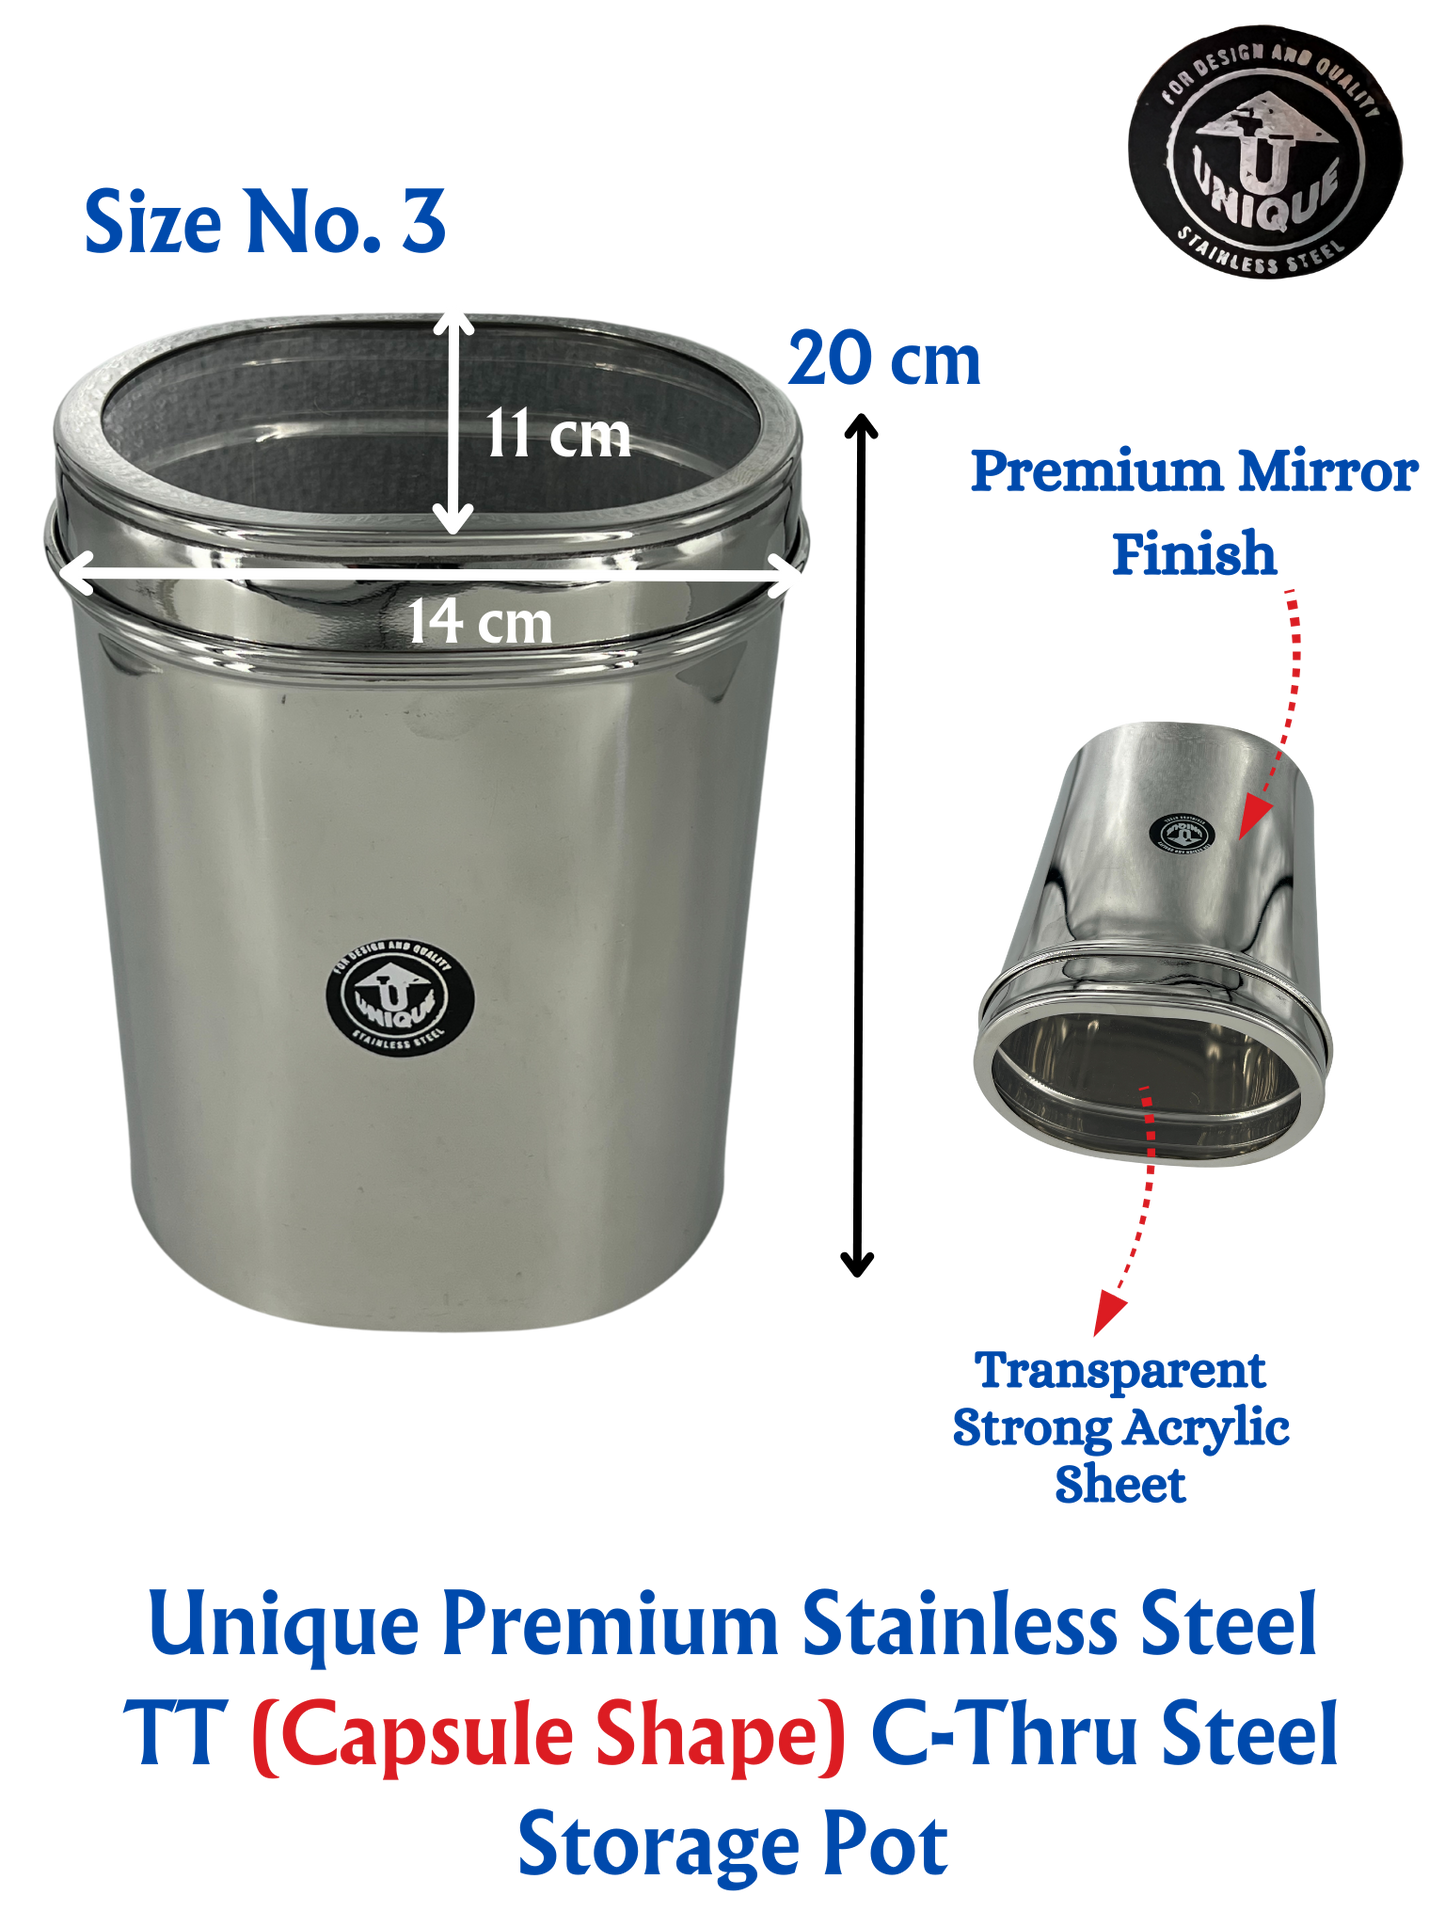 Unique Premium Stainless Square Steel Pot | Storage Container | See Thru | Mirror Polish | Kitchen Items Food Storage - Premium SS Water Jugs Containers Storage from Unique - Just Rs. 965! Shop now at Surana Sons